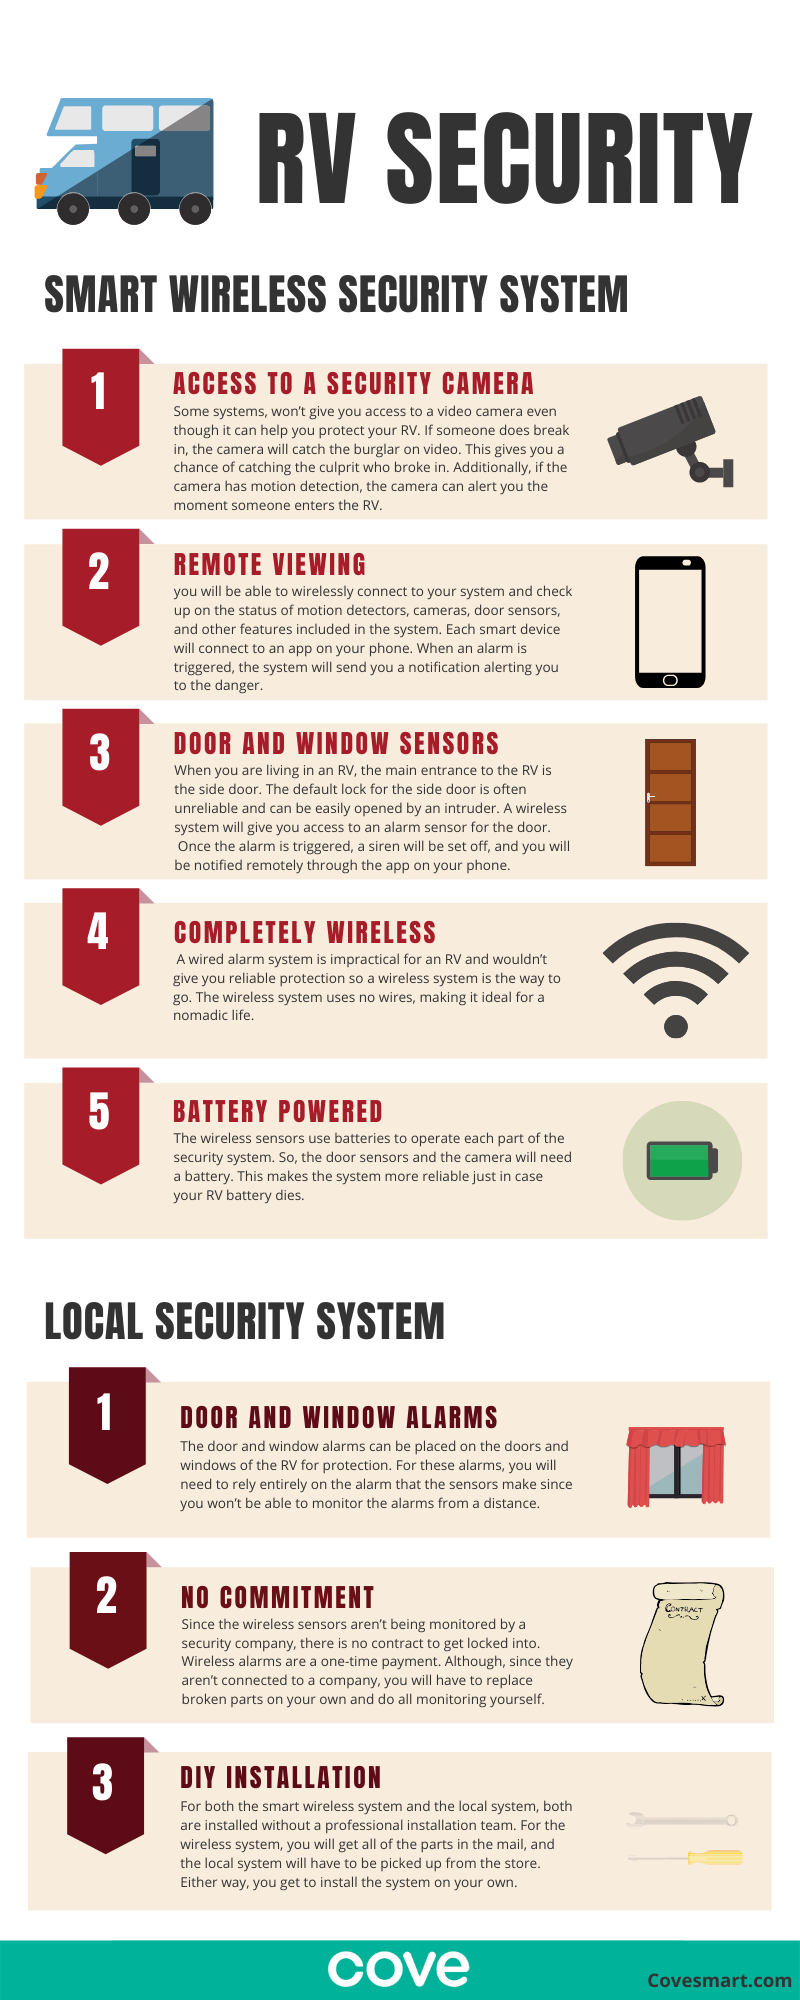 RV Security Infographic. images and text of the benefits of a monitored wireless alarm system and a local alarm system.